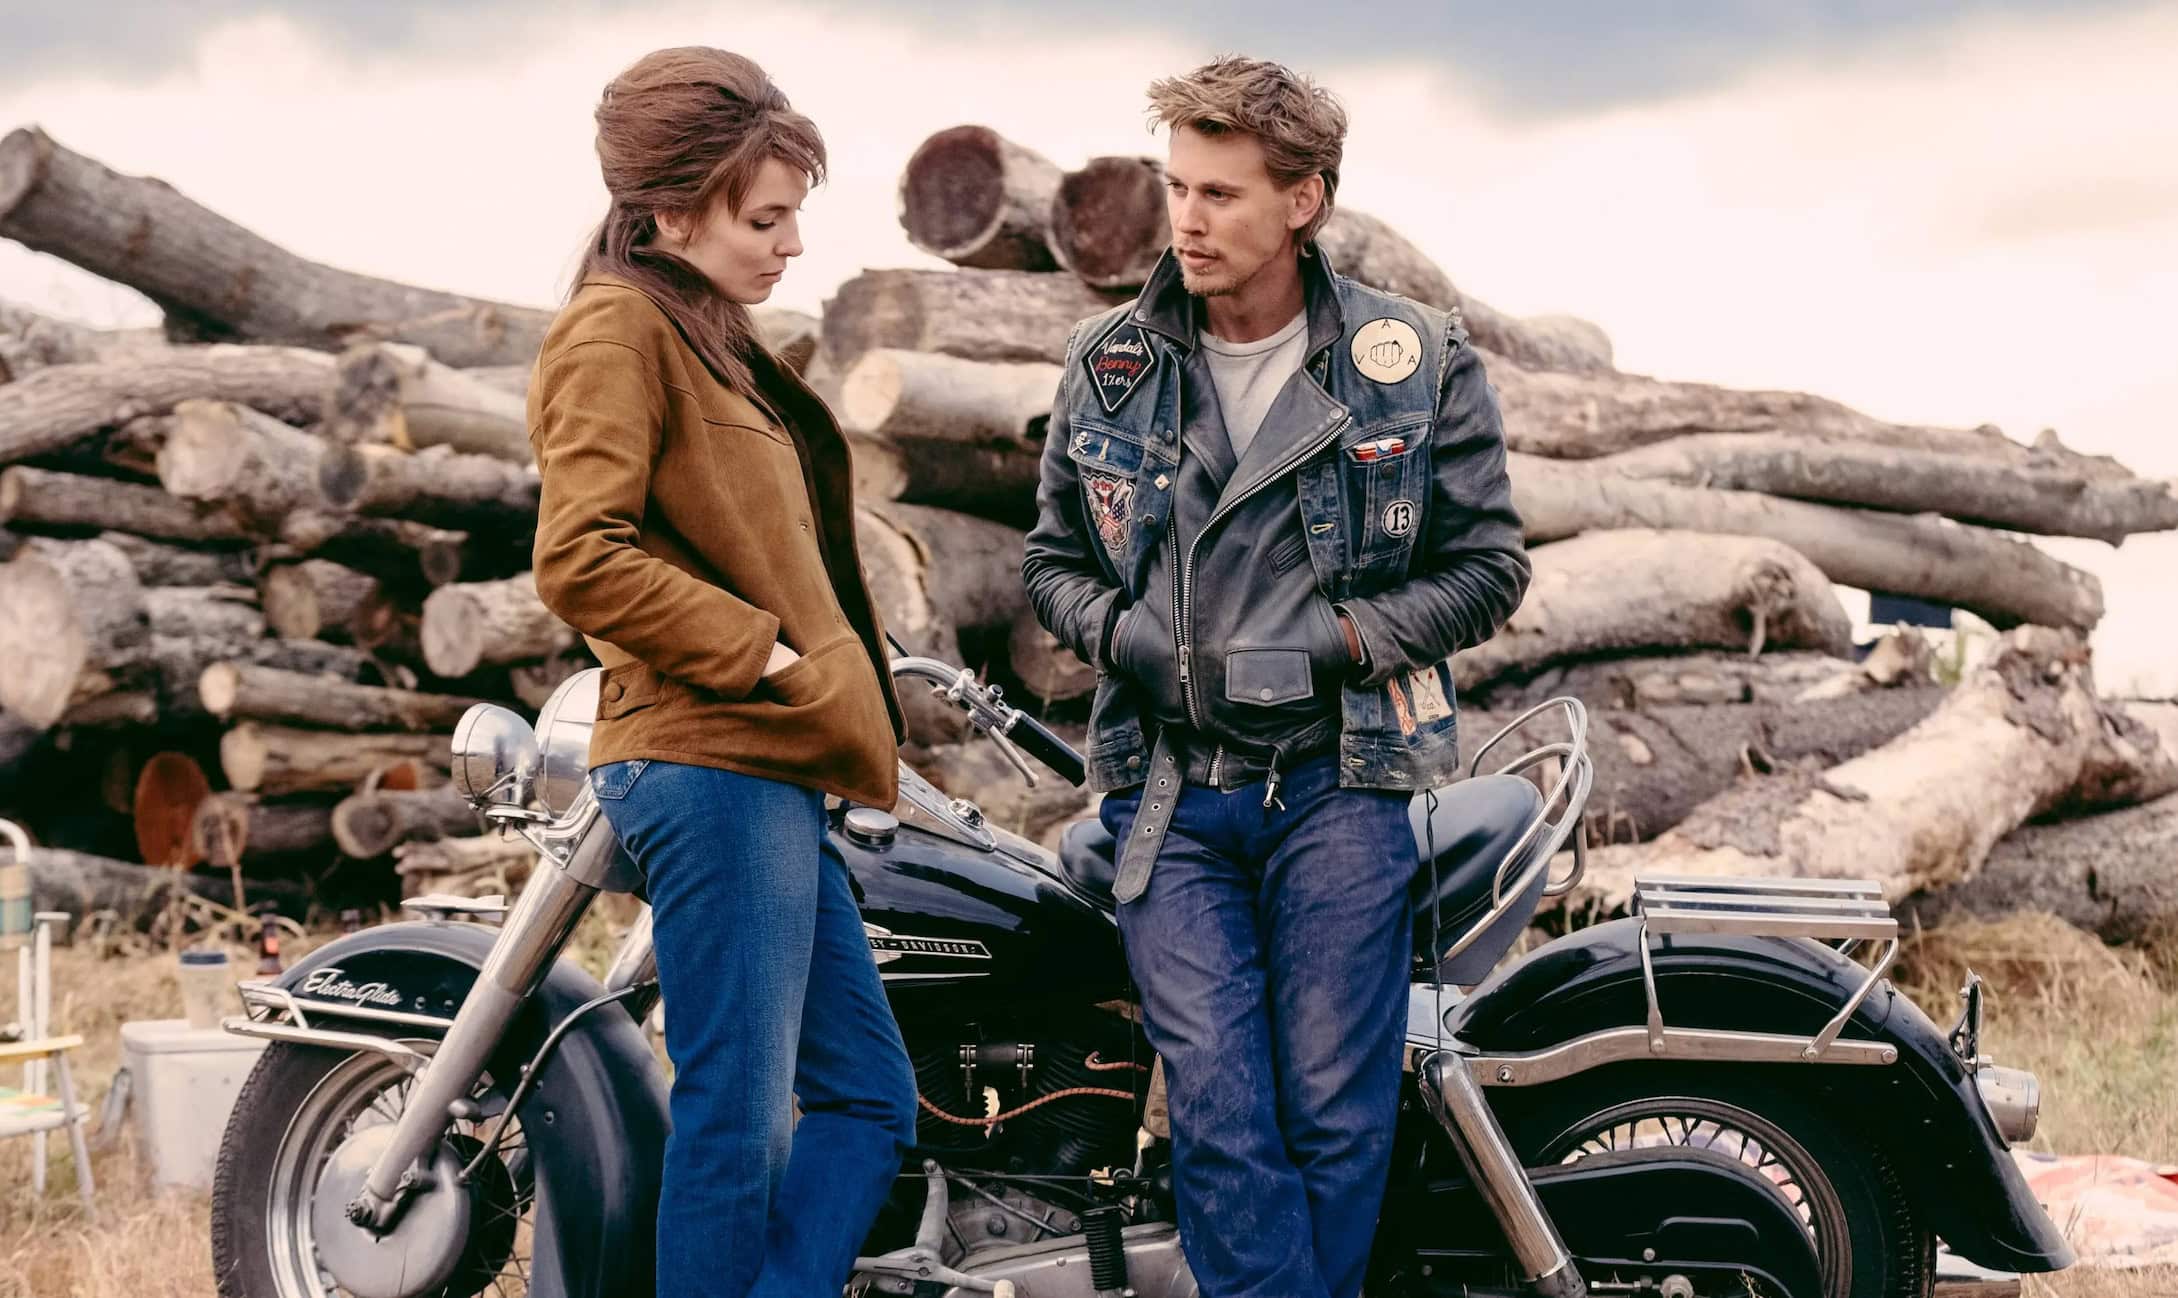 Journey Back to the Rebellious 60s with The Bikeriders and Its Star-Studded Cast